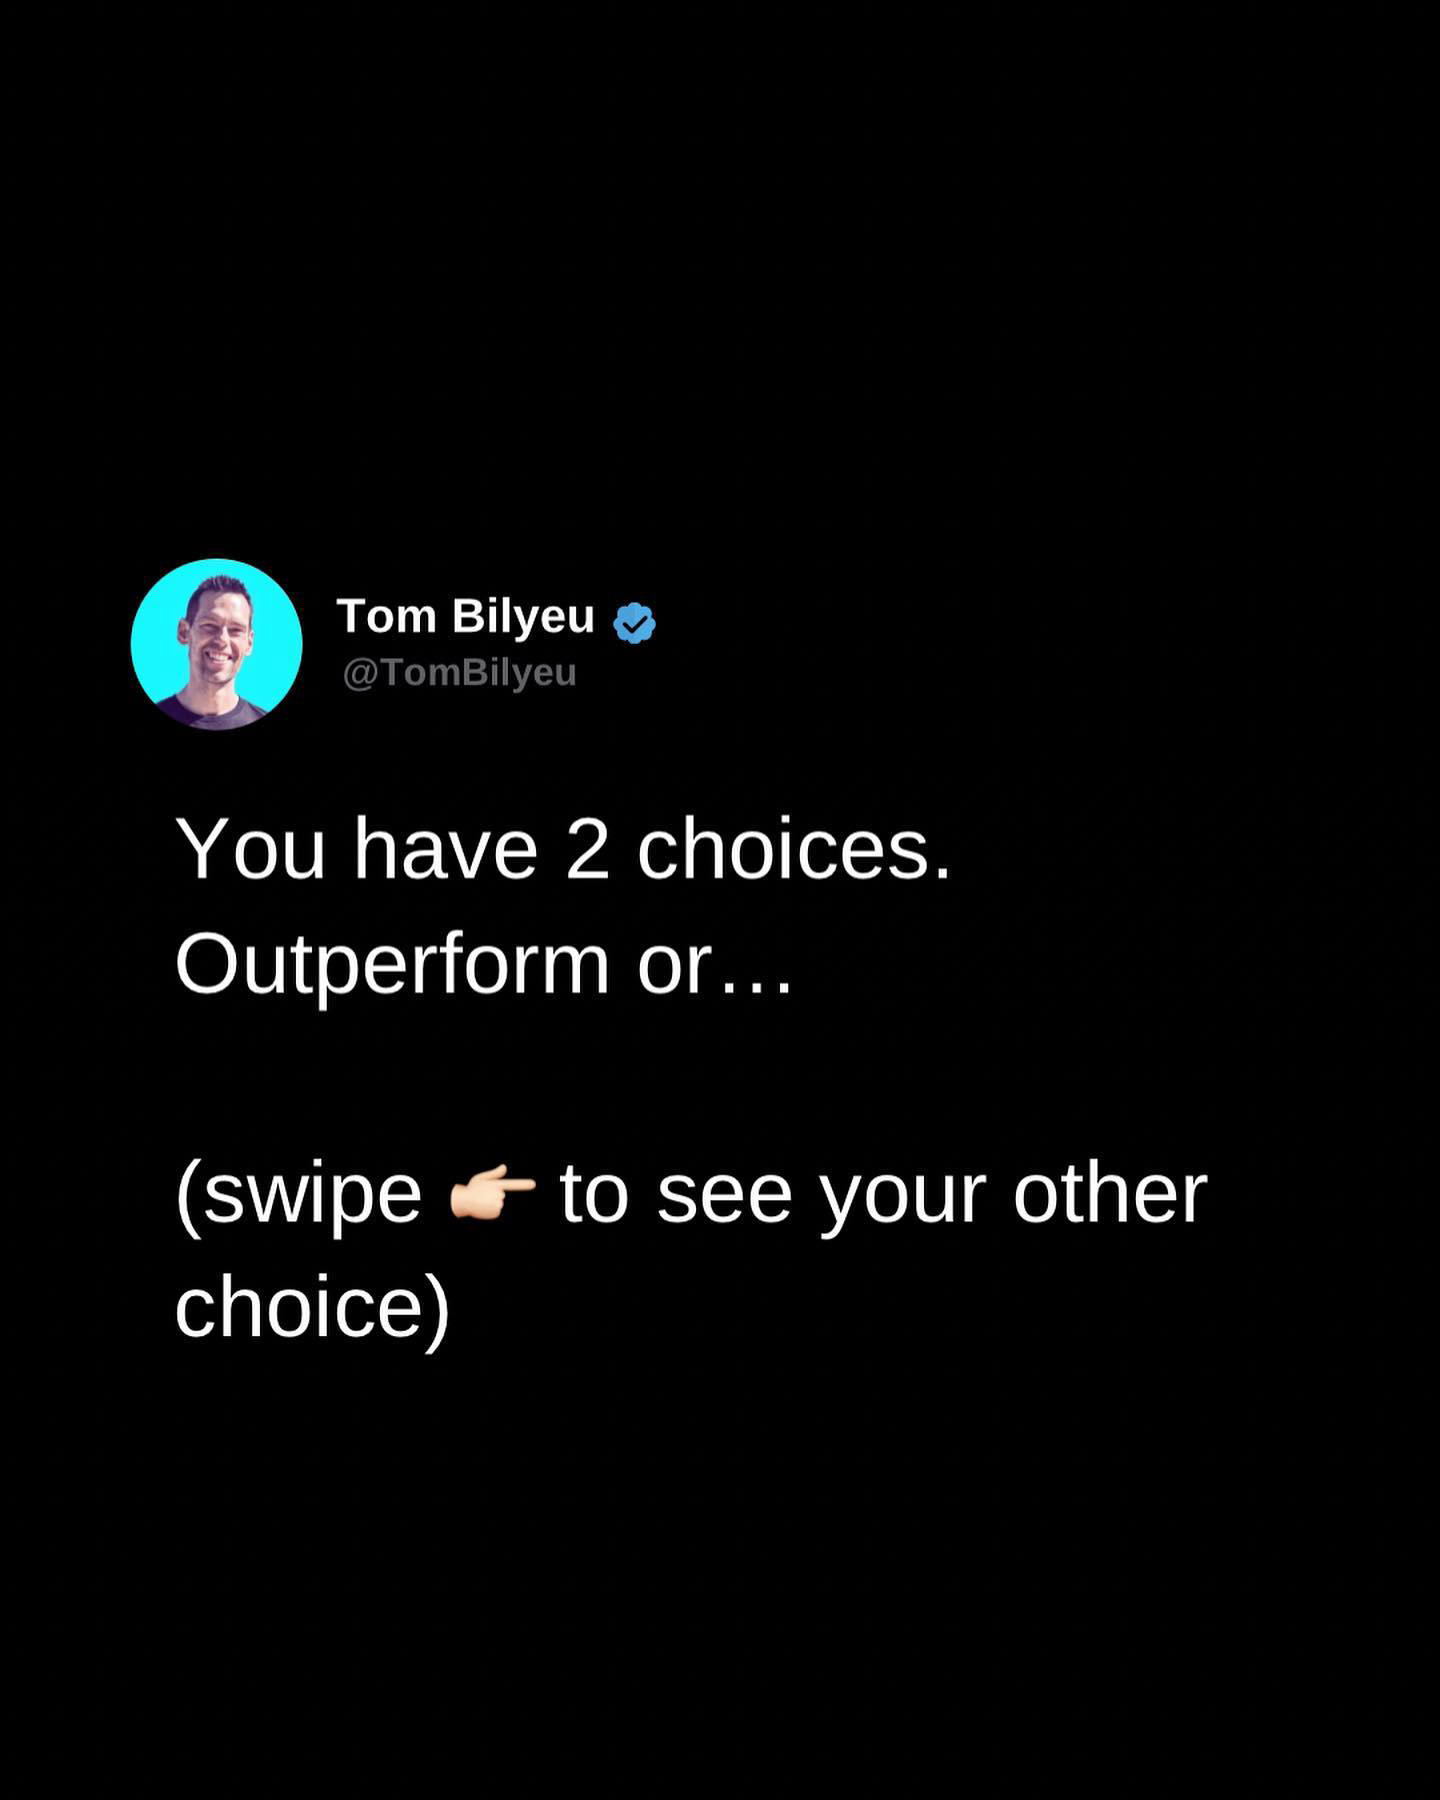 It’s that simple…what choice are you making